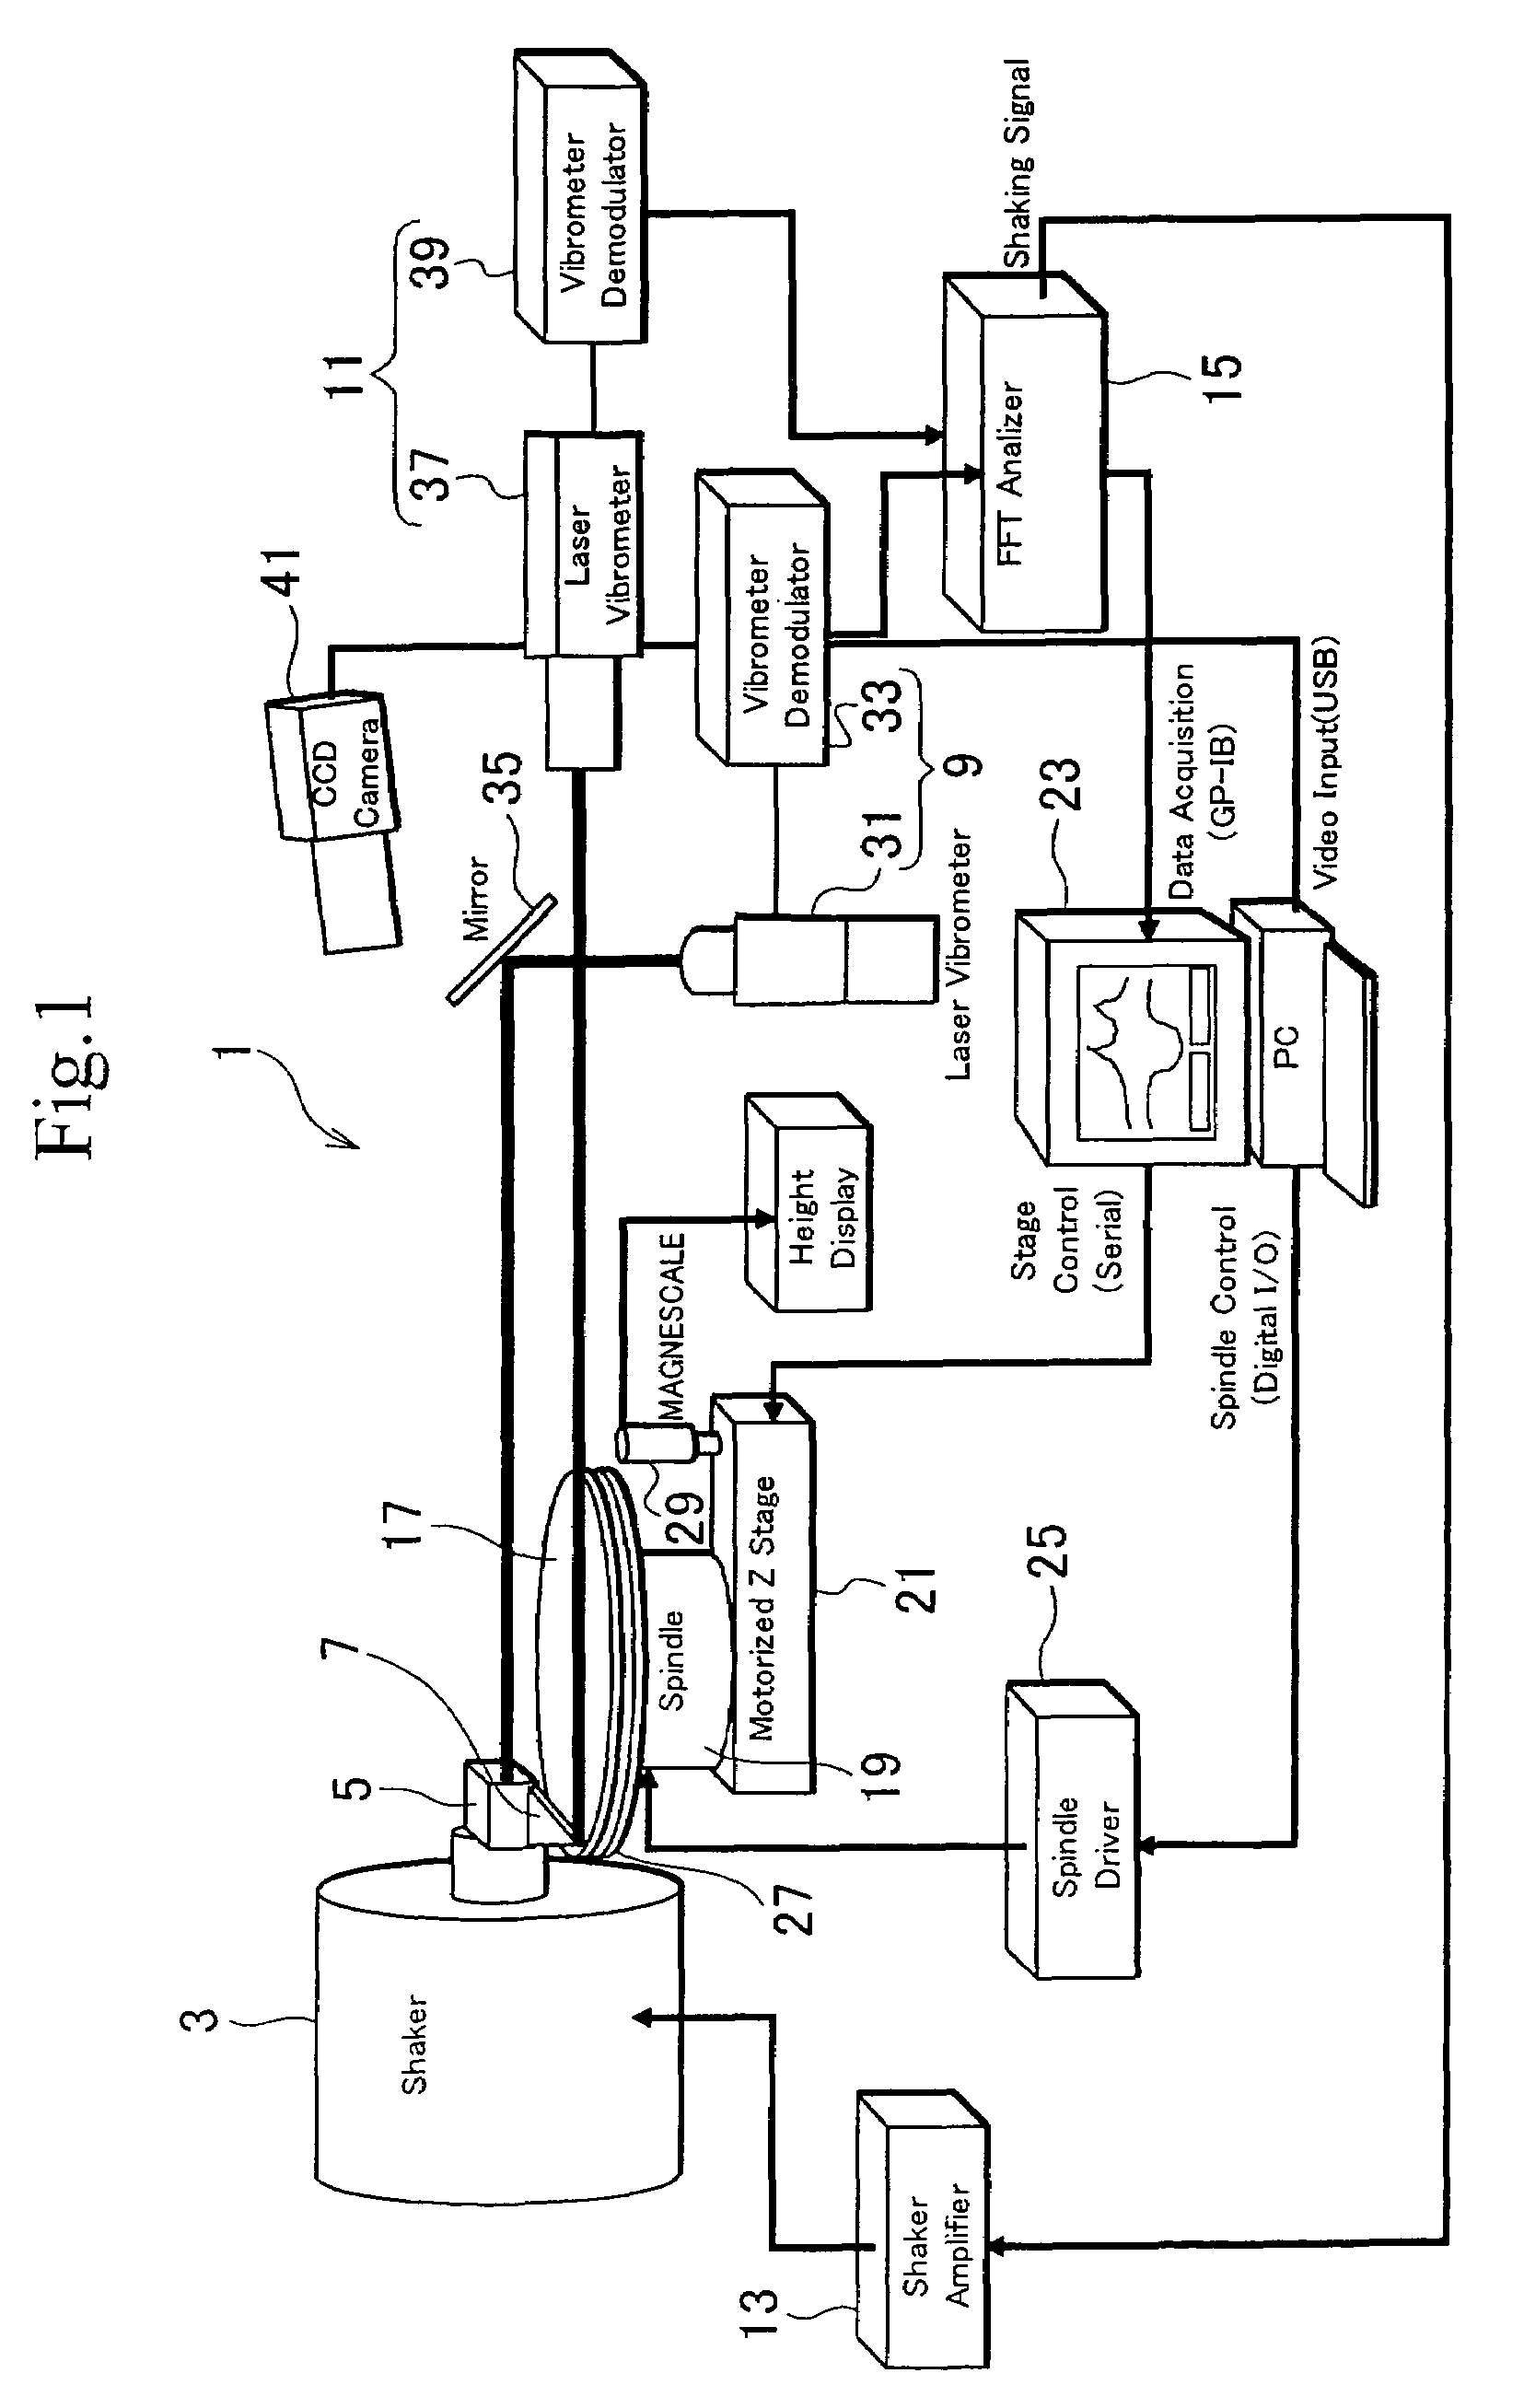 Apparatus for measuring vibration characteristic of head gimbal assembly